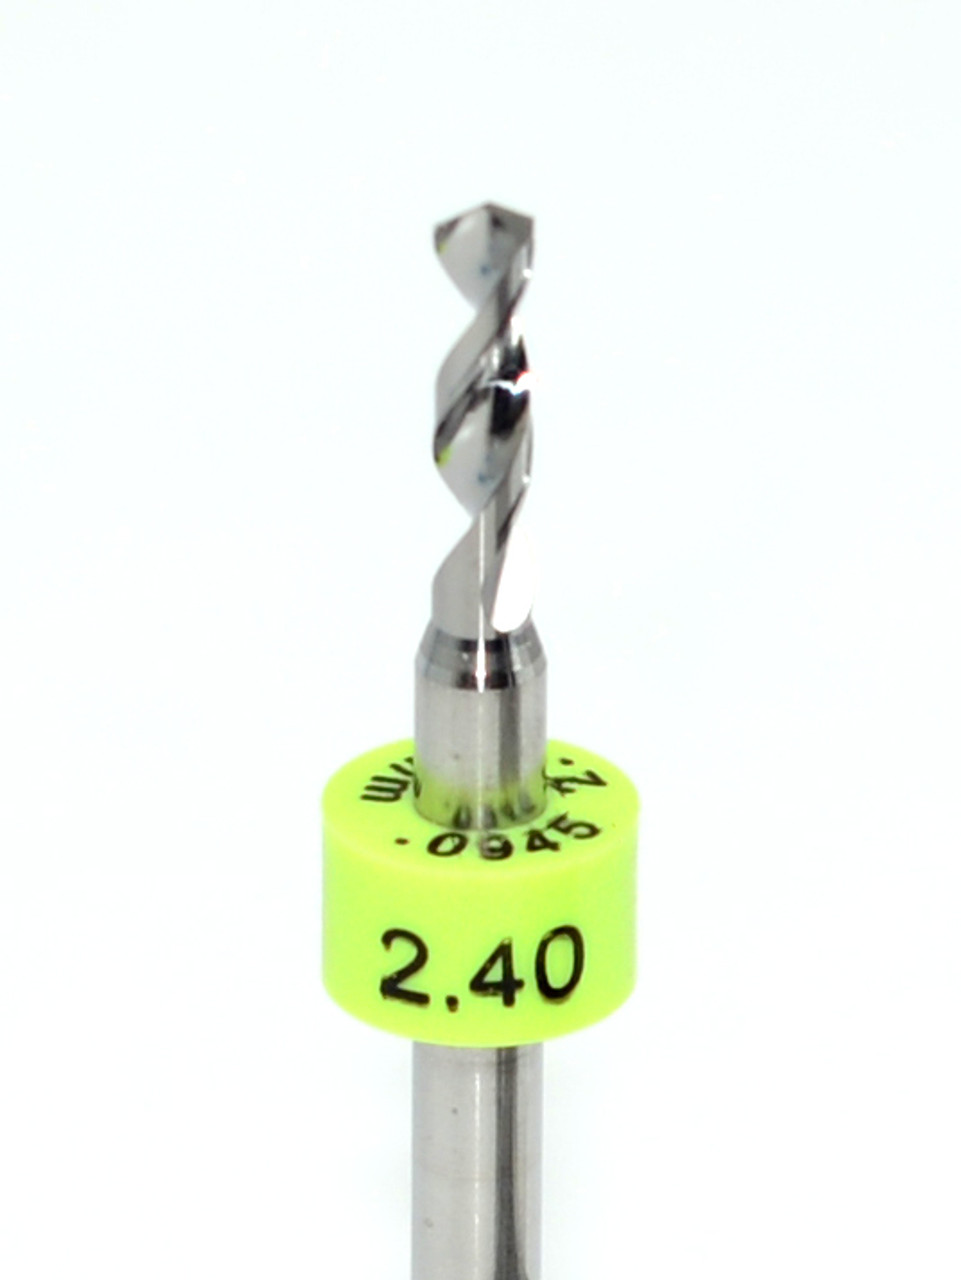 Drill bit Size: 2.40mm   

 Flute length: sizes .50 to .65mm 8.90mm, sizes .70 to 2.50mm 10.50mm

Drill Point 135Â°, Shank .125â€ / 3.18mm,Overall length 38mm /1.50â€

All bits have plastic size rings, Material Micro-Grain Carbide Grade ISO K20 / K30

Drill bits Self centering on flat surface Other surfaces use center drill first